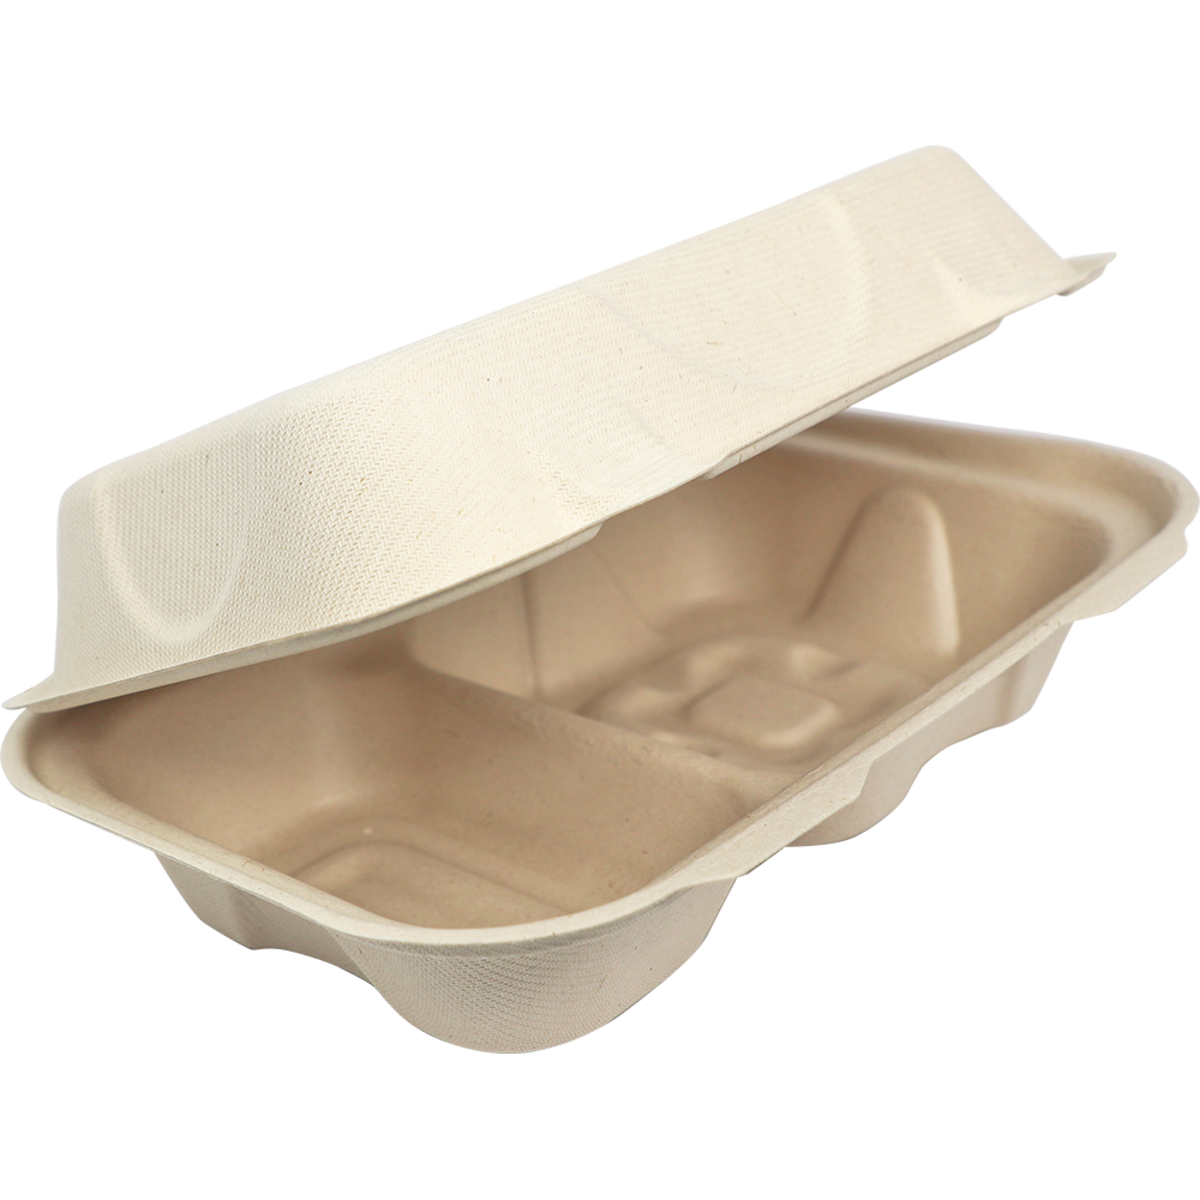 9" x 6" x 3" Clamshell Two Compartment | Natural Plant Fiber (Case of 500)